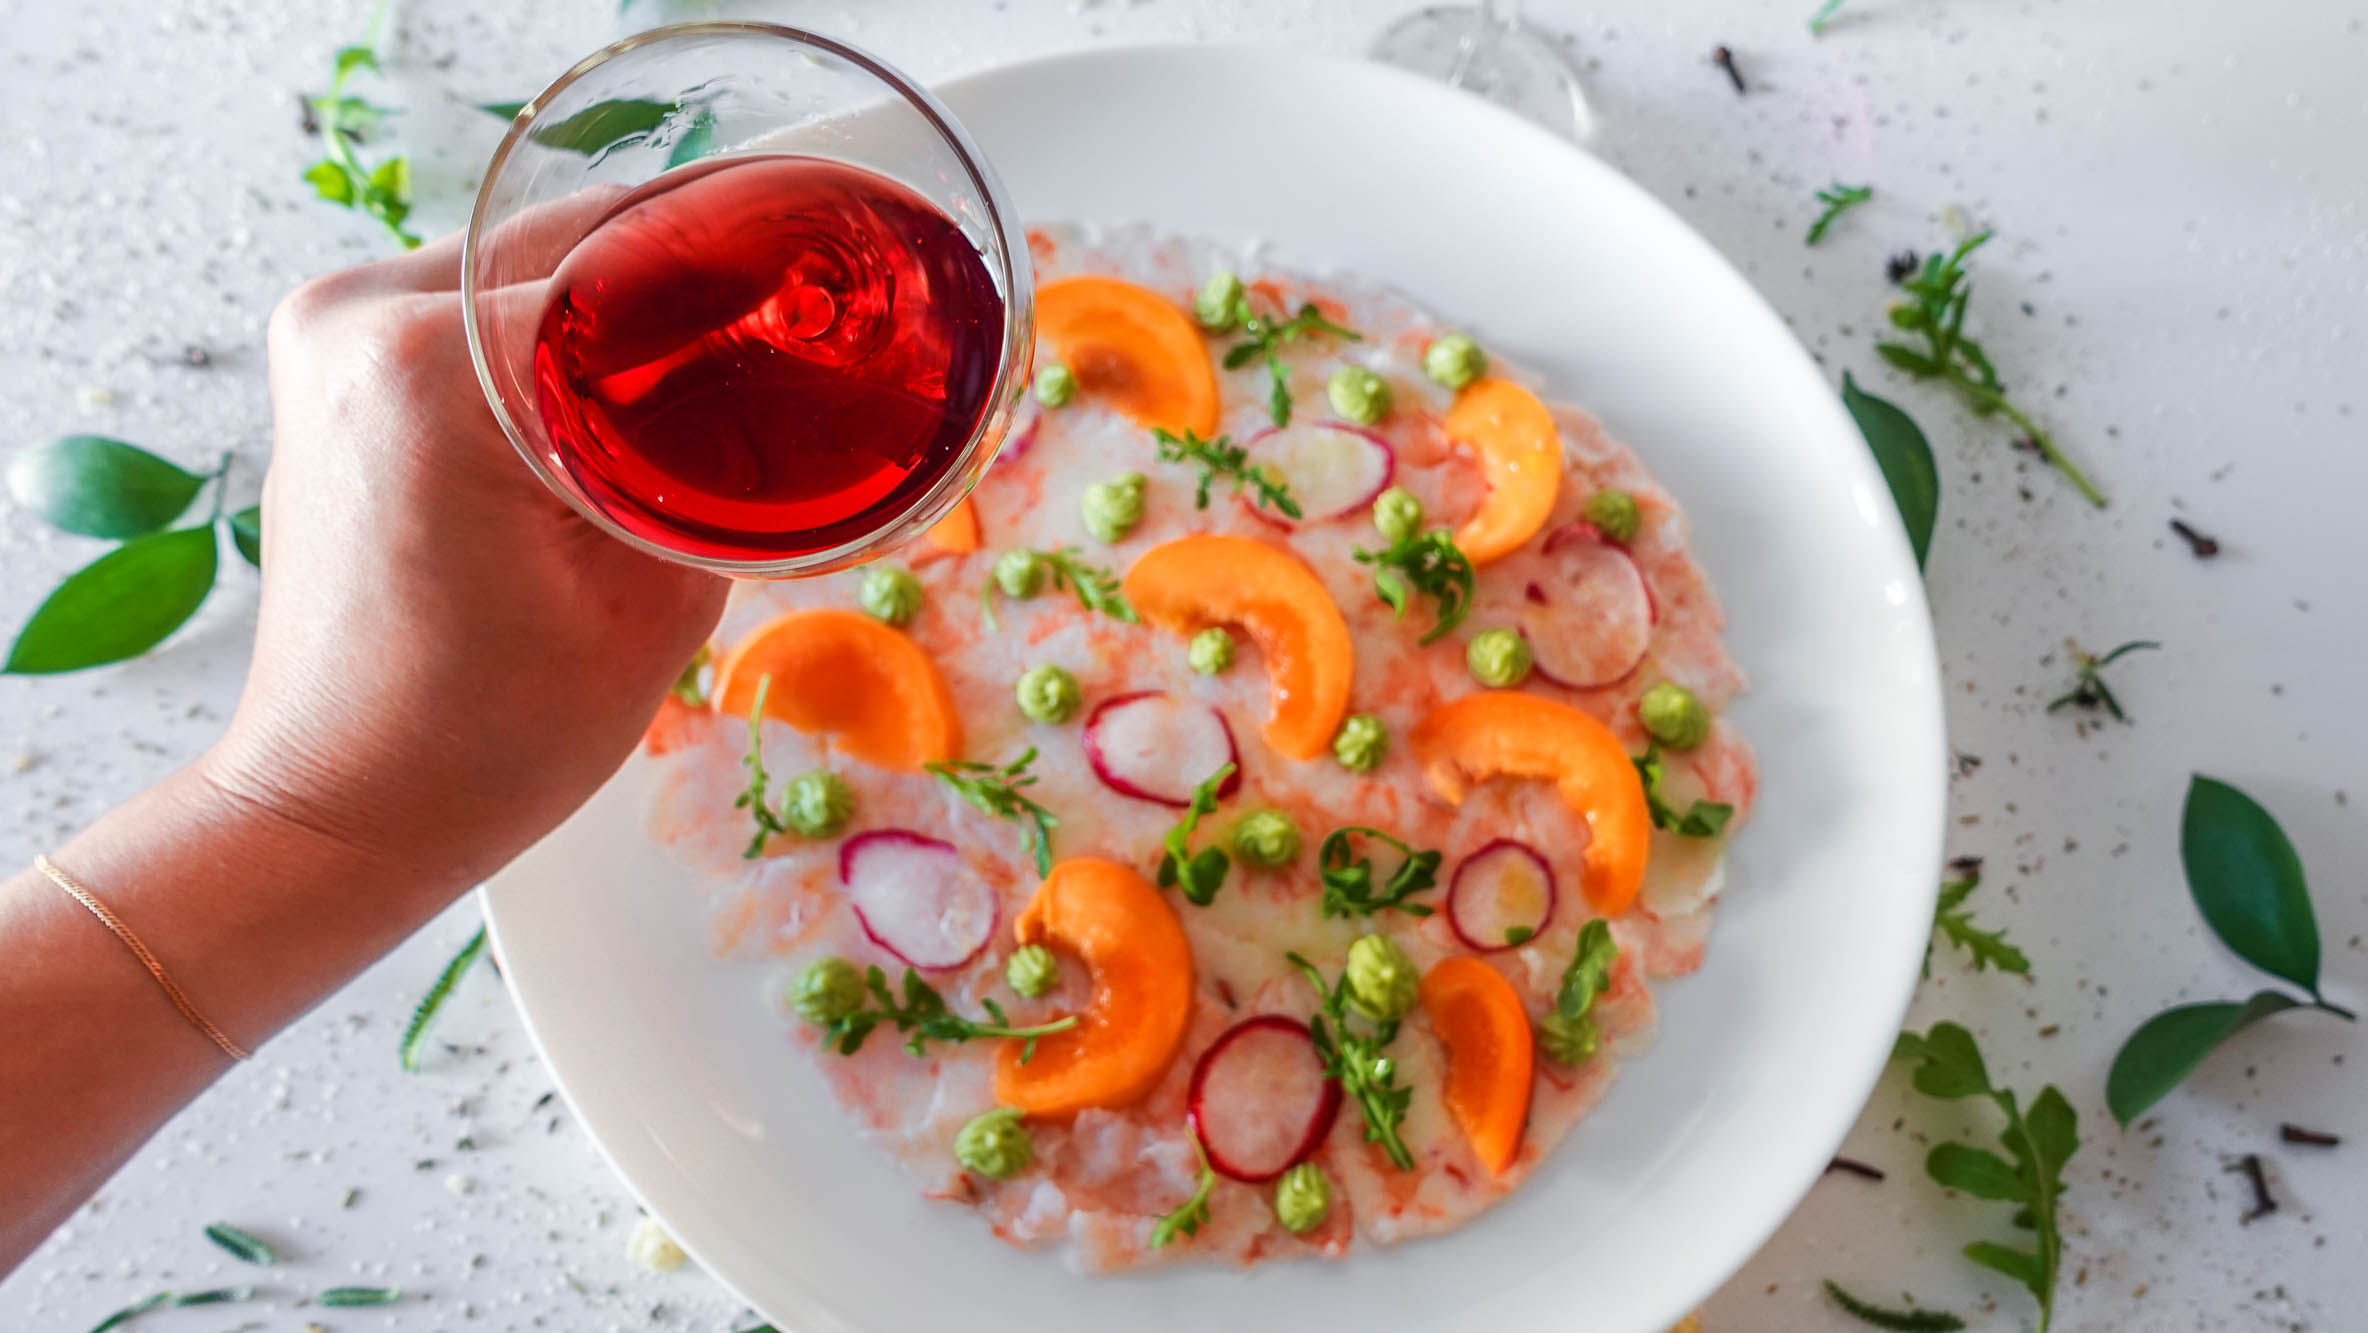 Apricot Shrimp Carpaccio on a plate with a glass of wine in a left hand